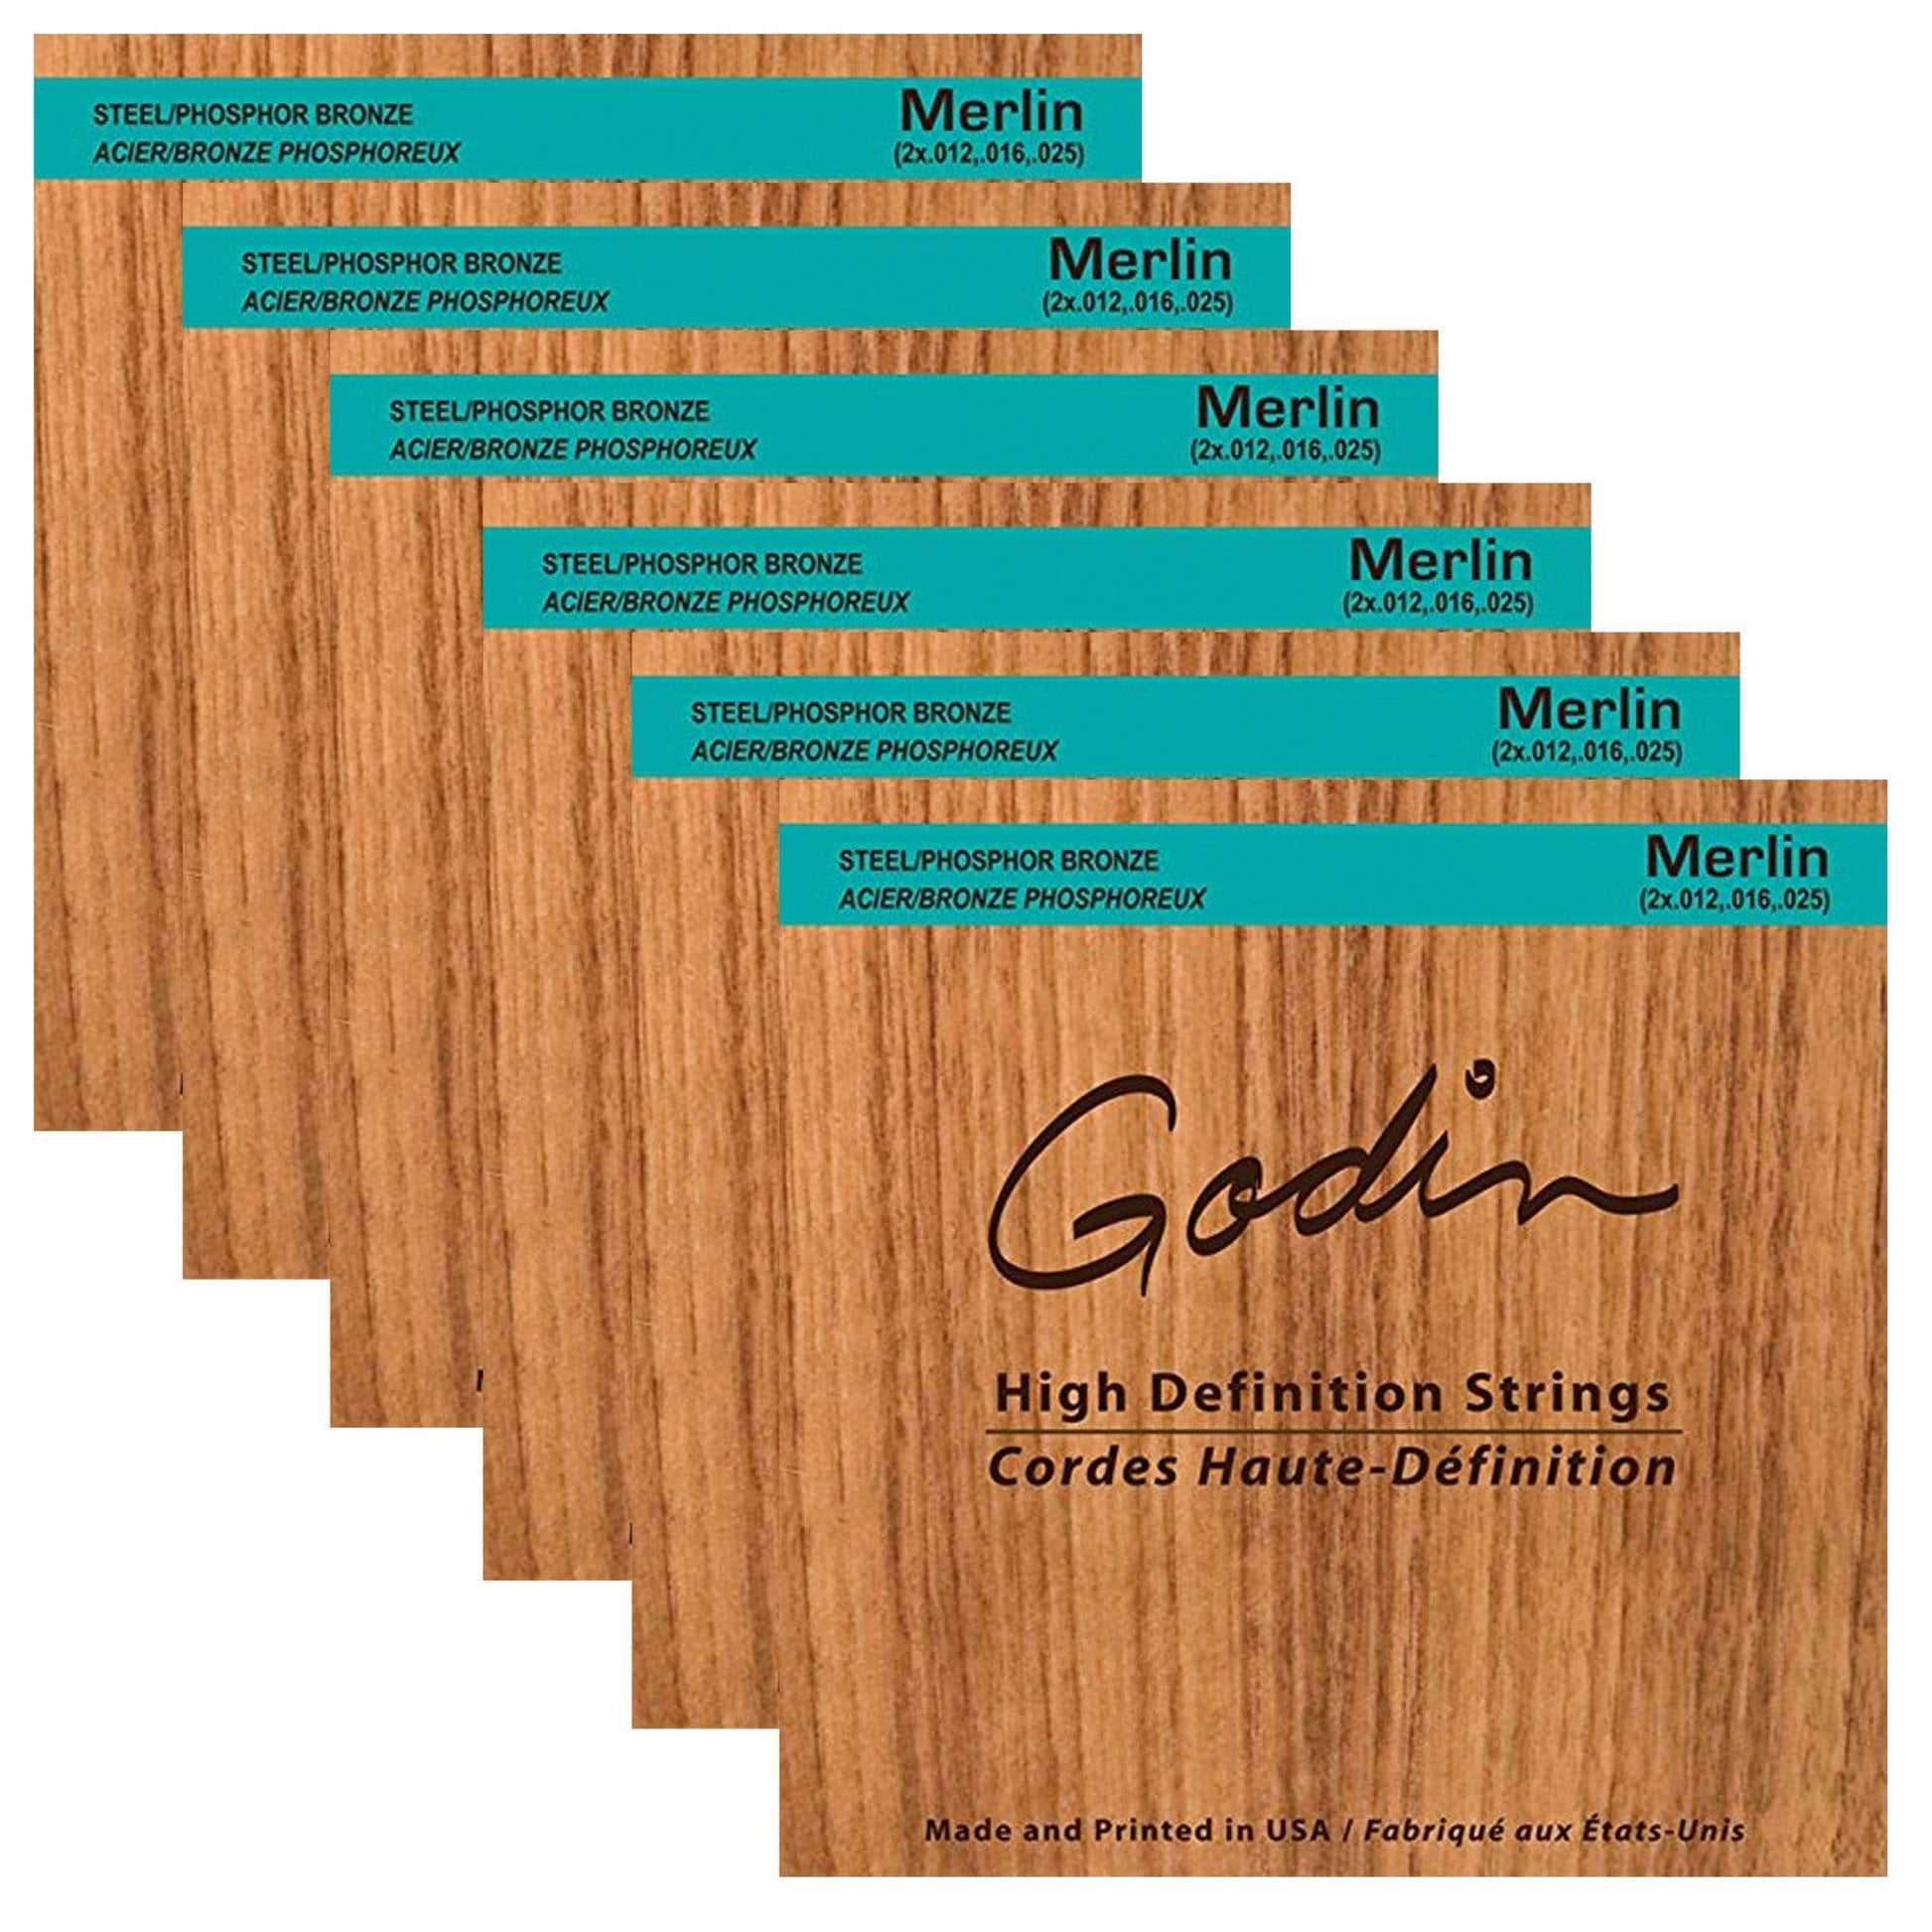 Seagull Merlin High-Definition Strings 12-25 (6 Pack Bundle) Accessories / Strings / Other Strings